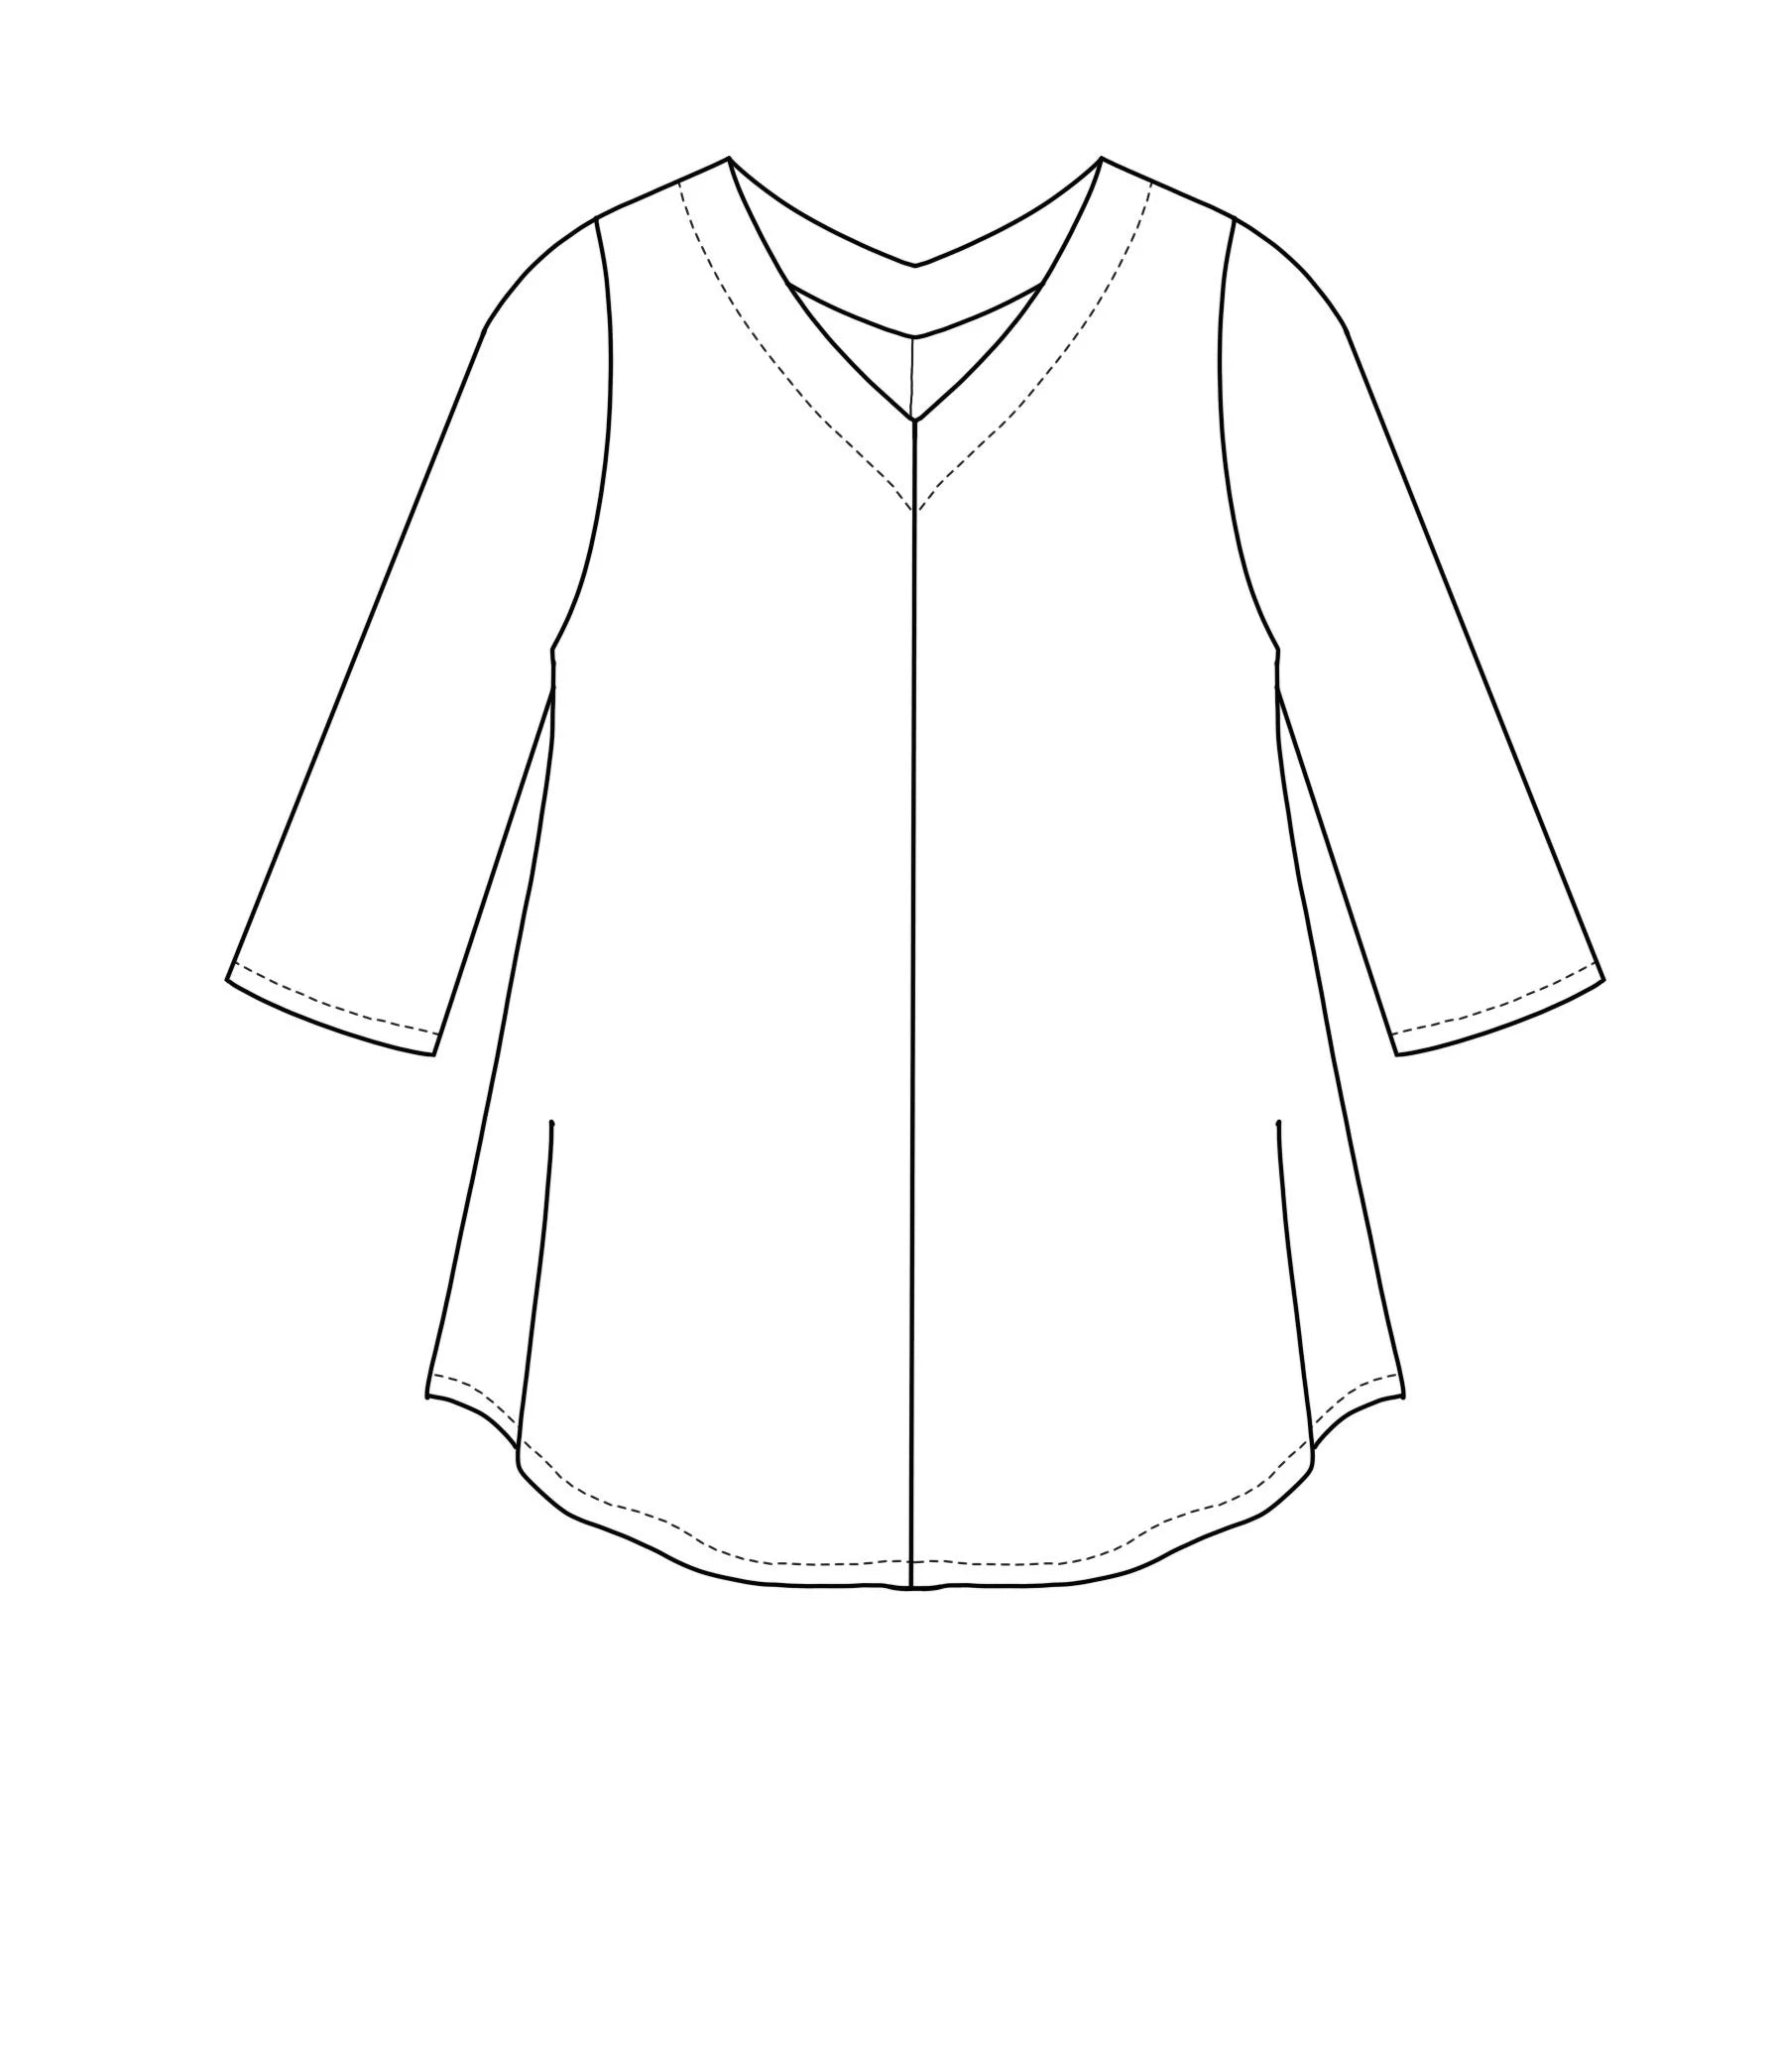 flat drawing of a 3/4 sleeve pull over top with a v neck and a front center seam